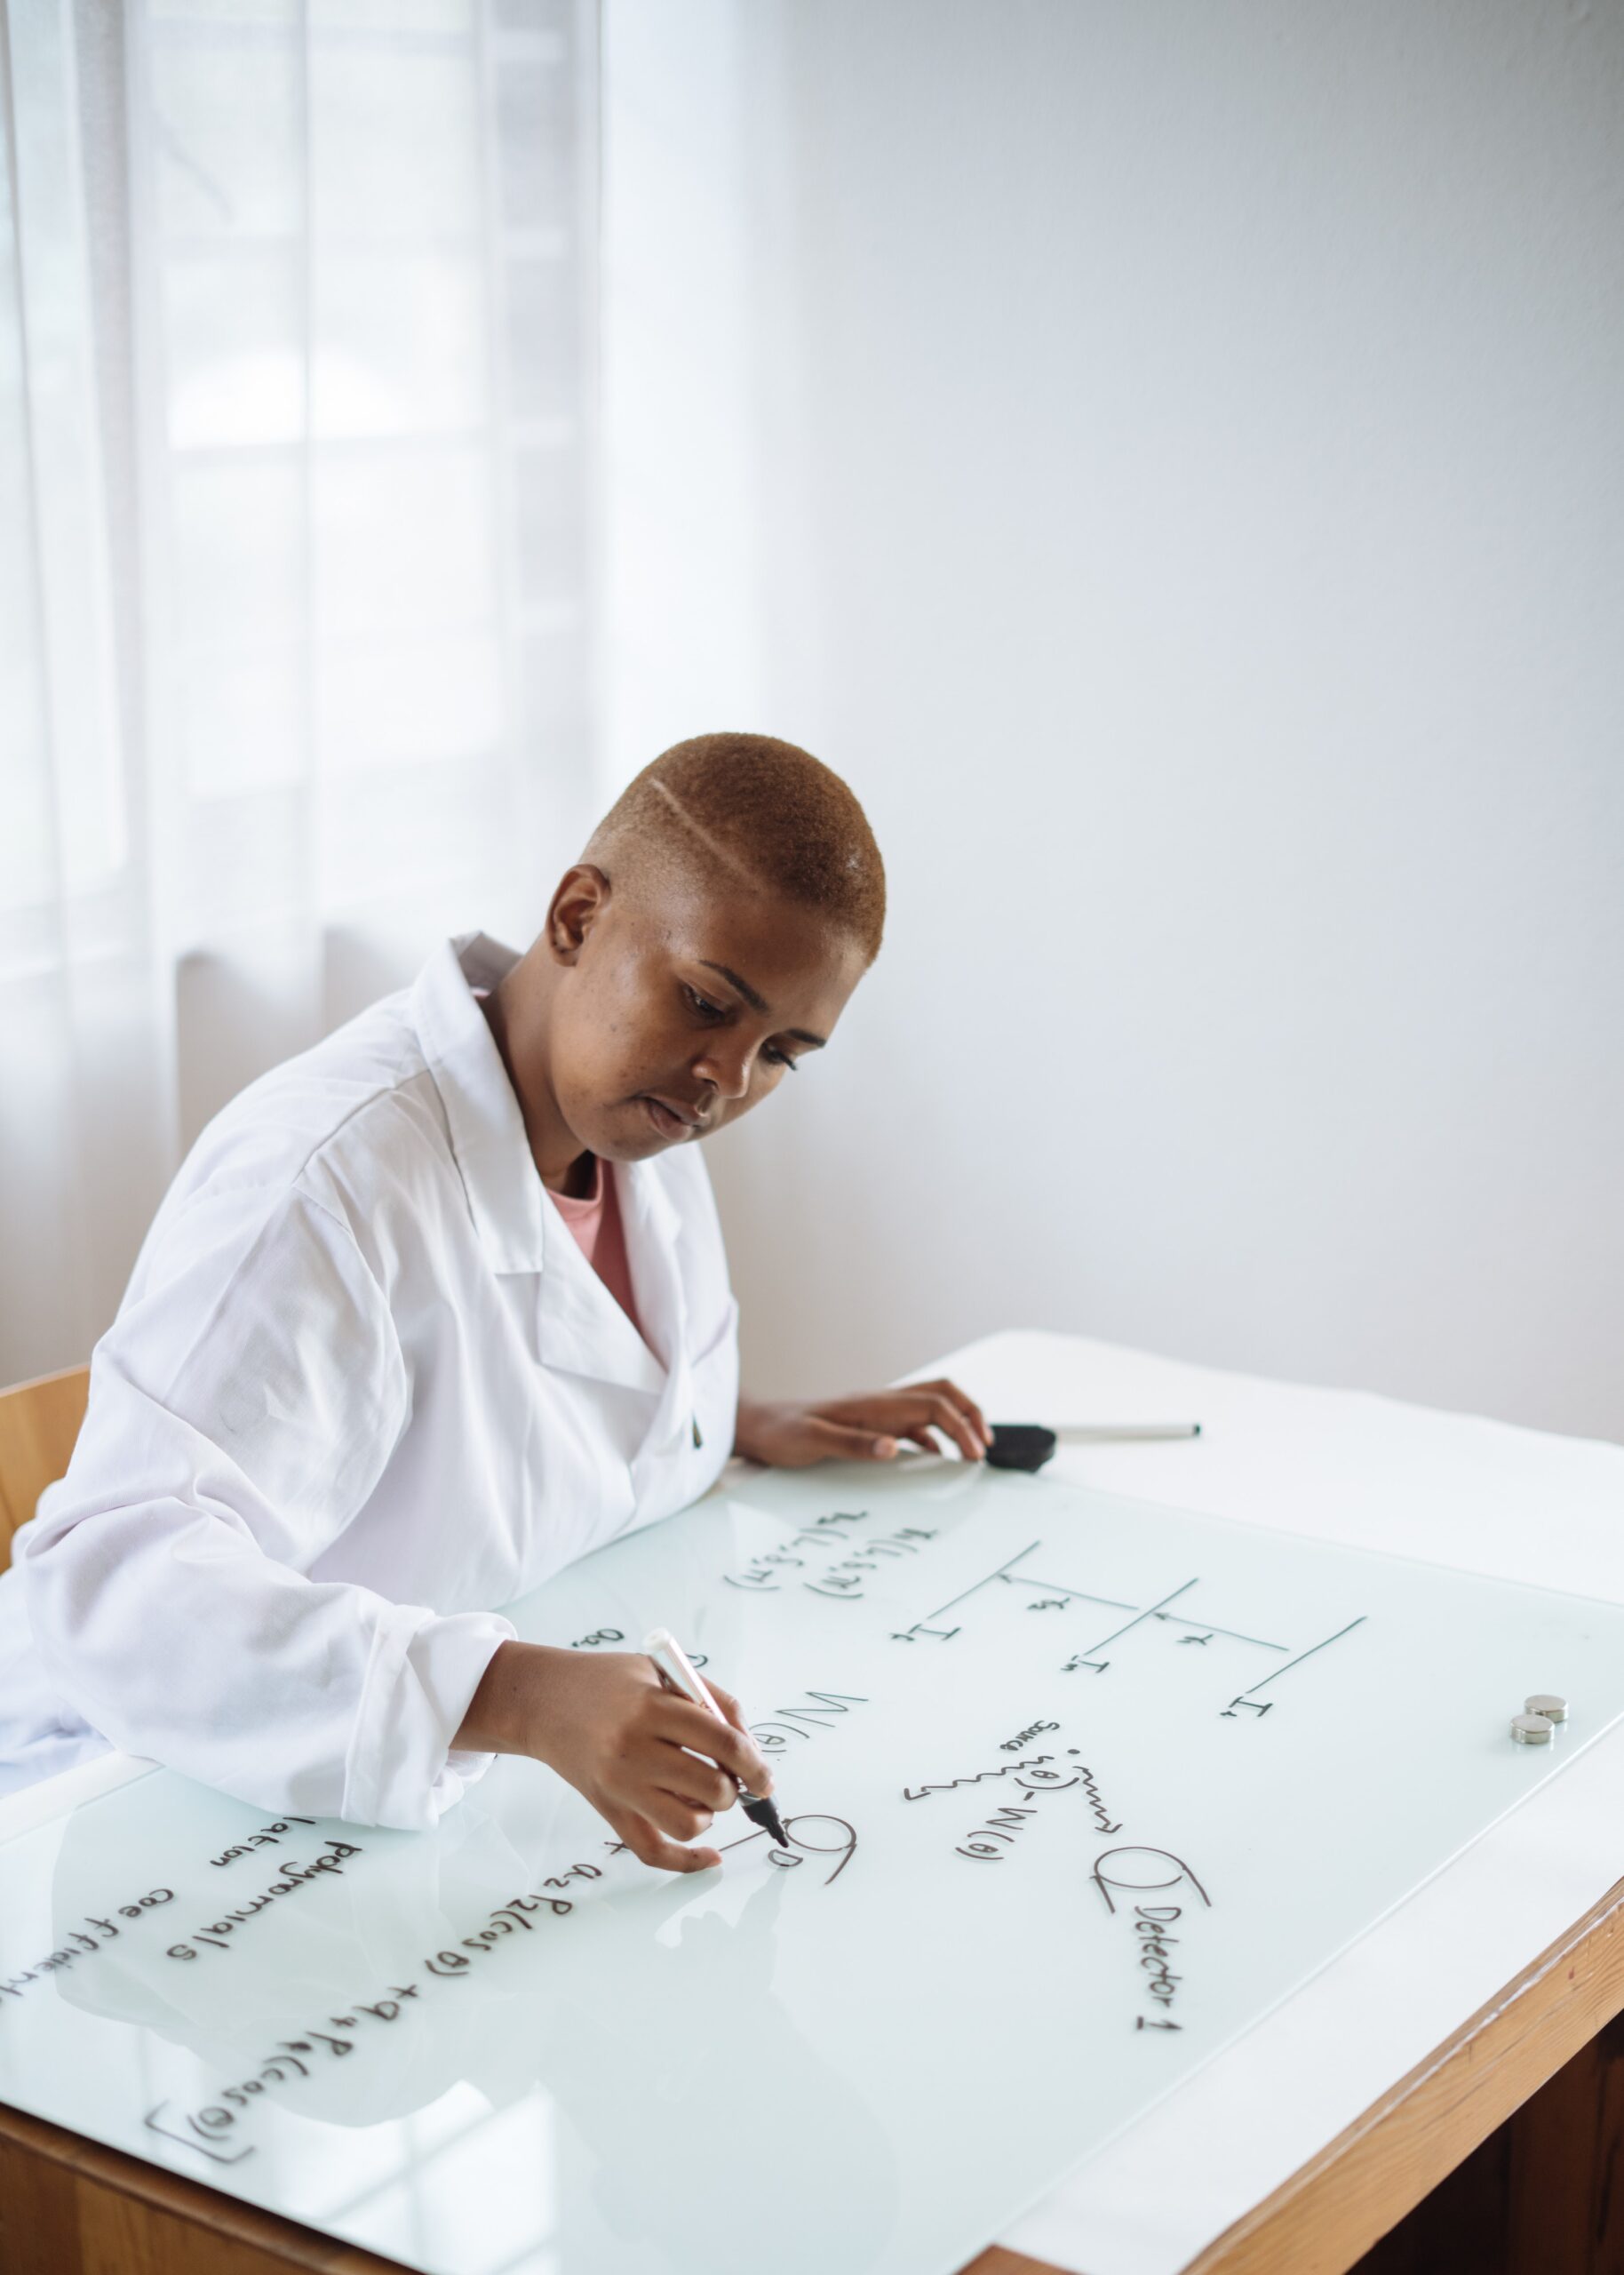 Black Women in STEM You Should Know